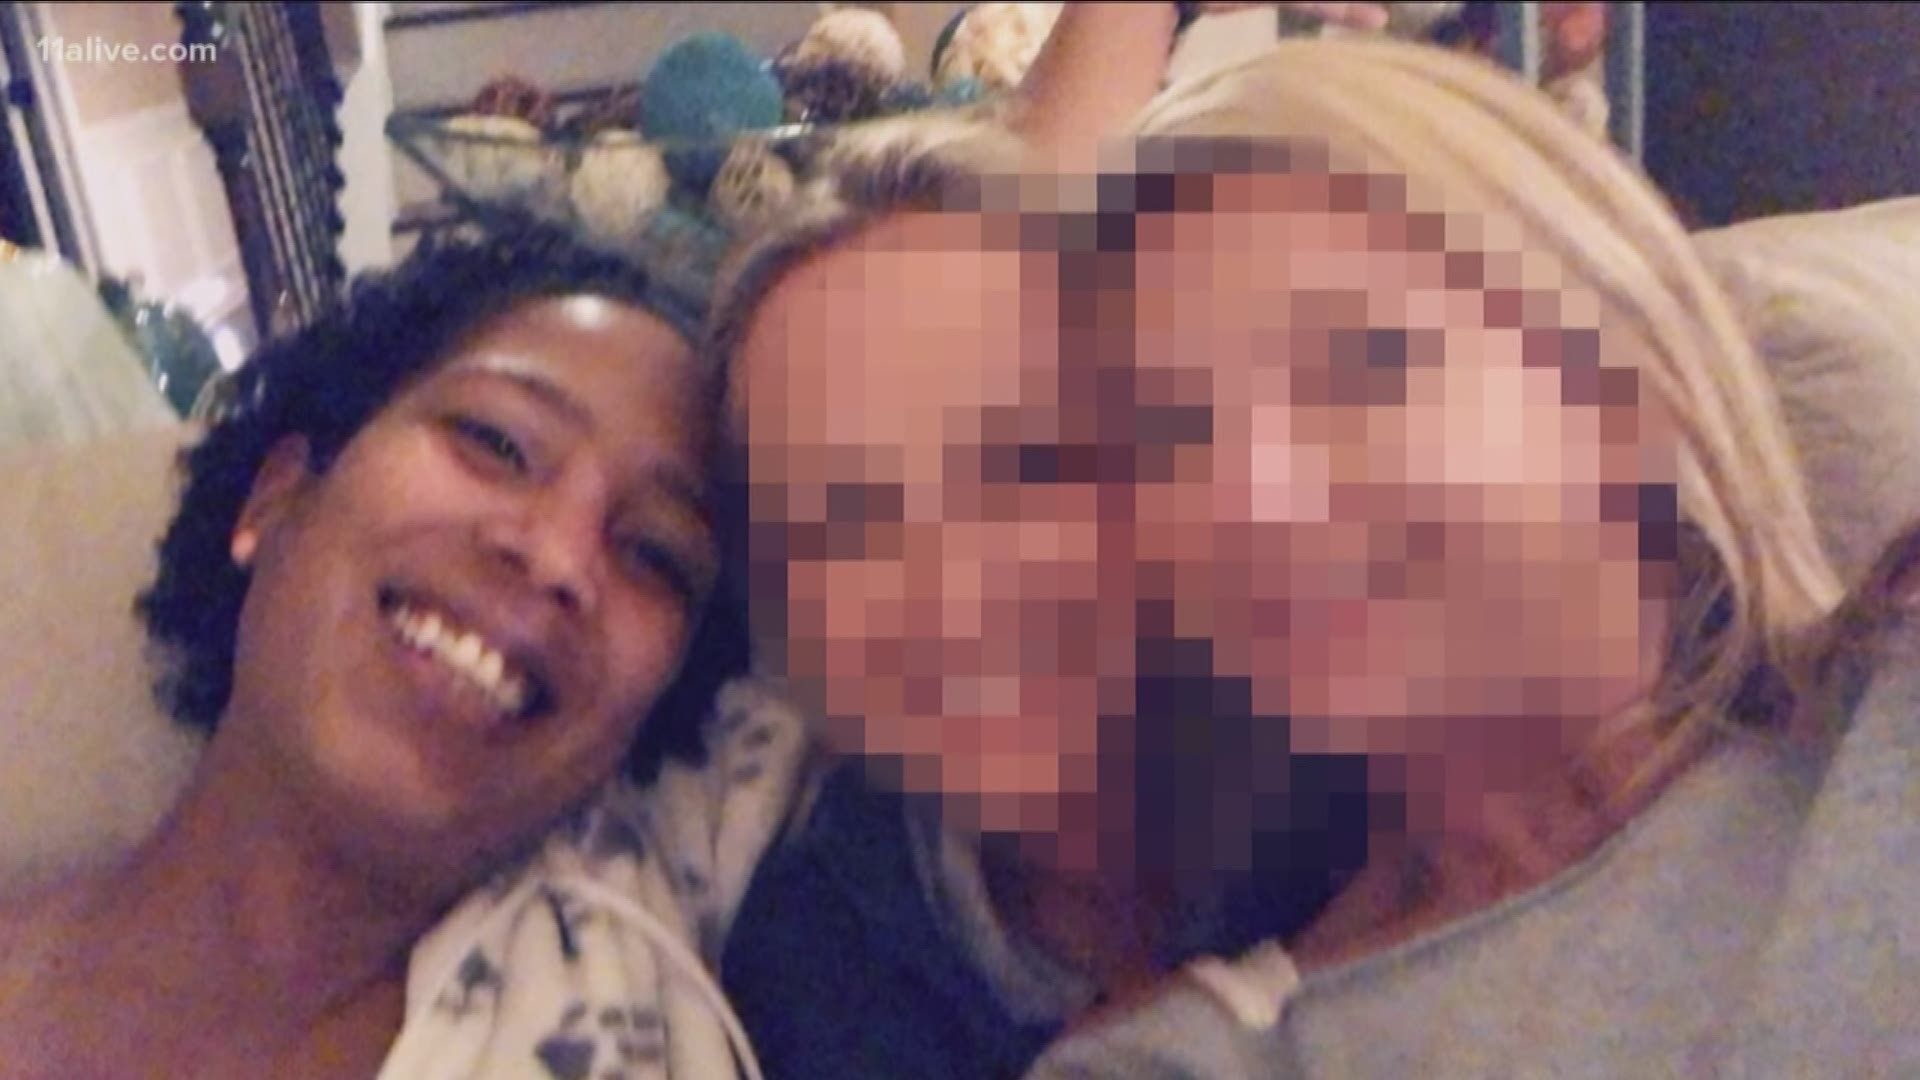 The file contains photos and videos from the night the mom died.